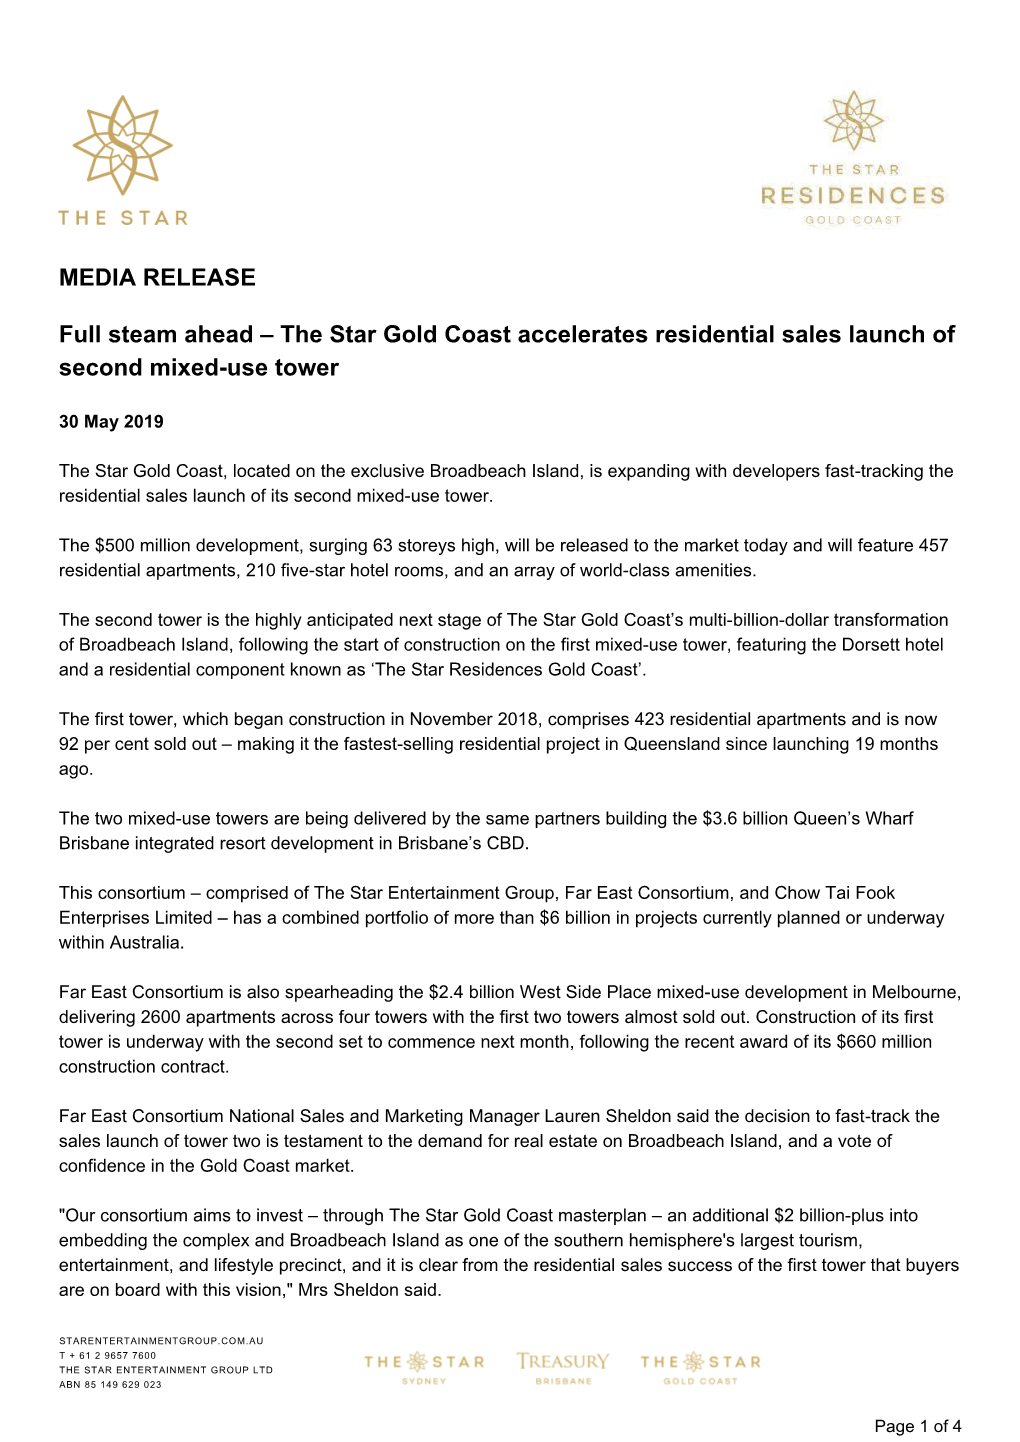 The Star Gold Coast Accelerates Residential Sales Launch of Second Mixed-Use Tower